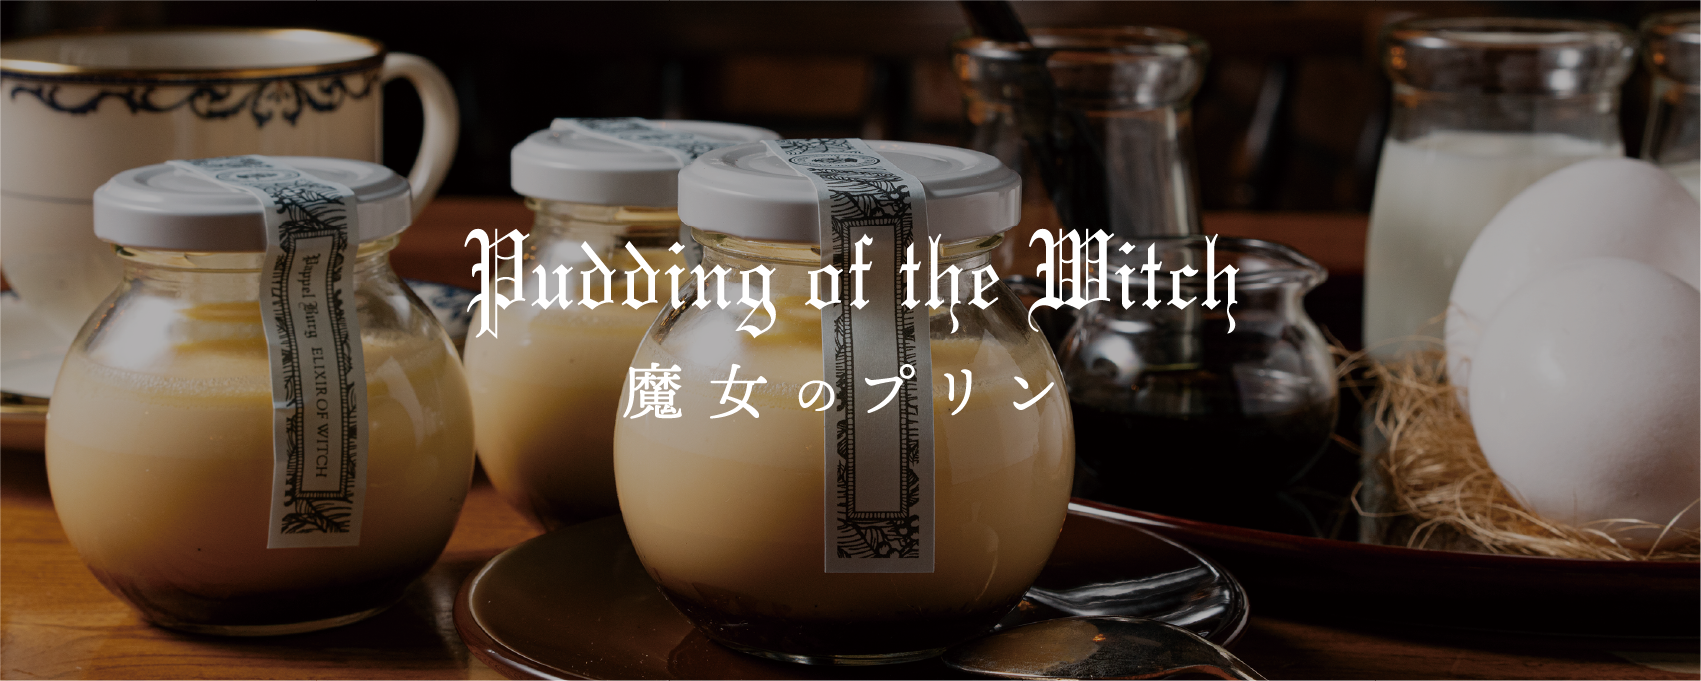 pudding of the witch